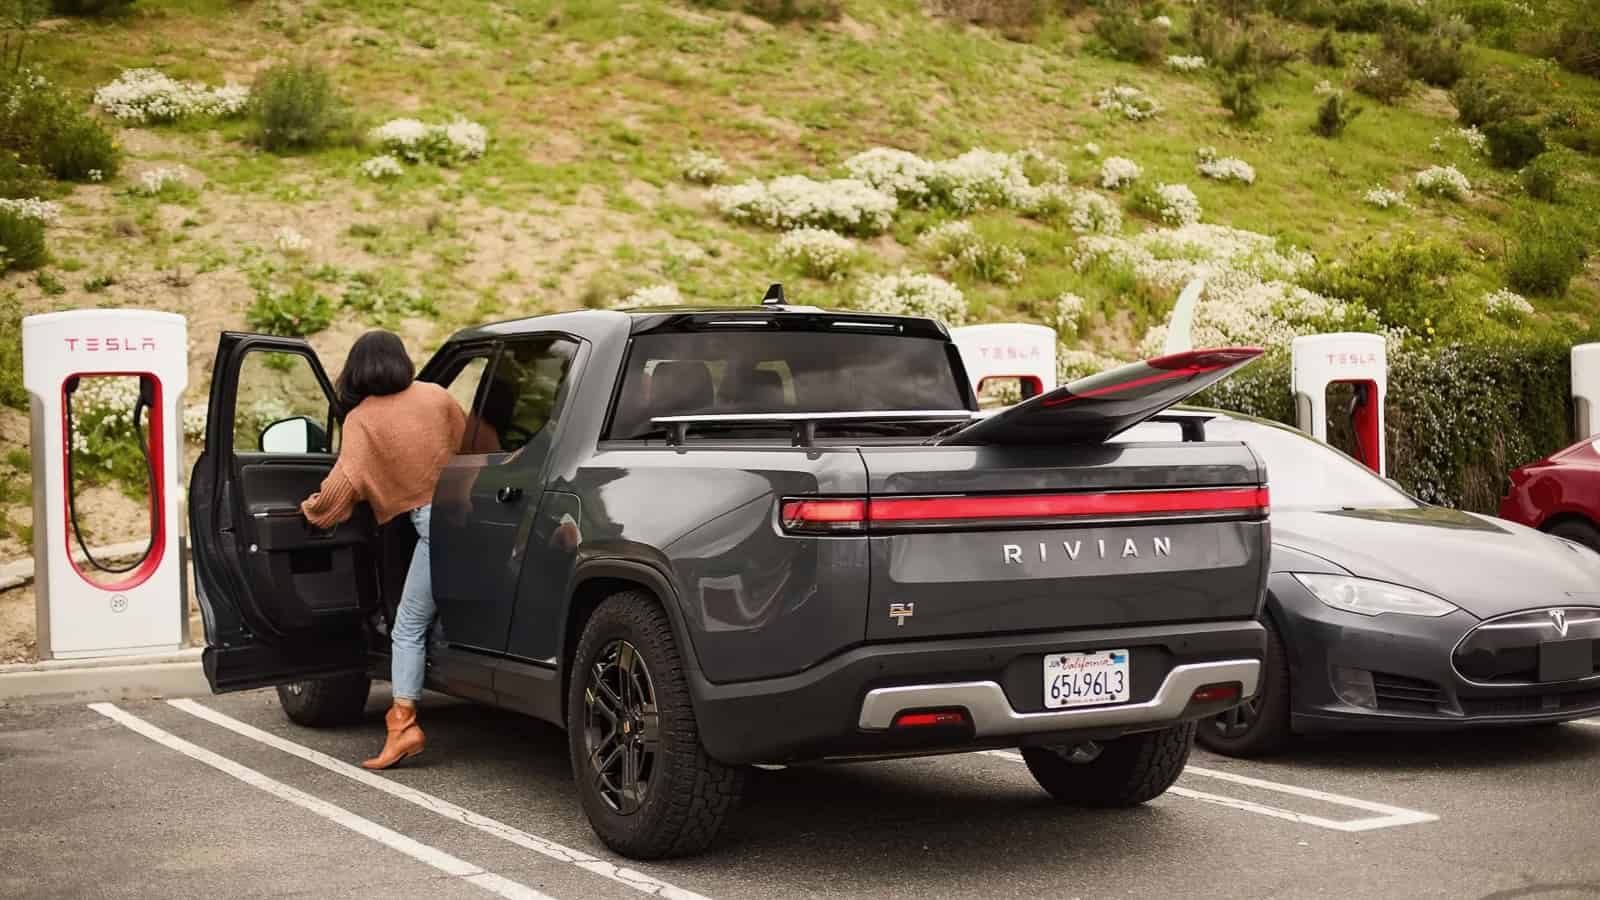 Rivian Vehicles Now Compatible with Tesla Supercharger Network